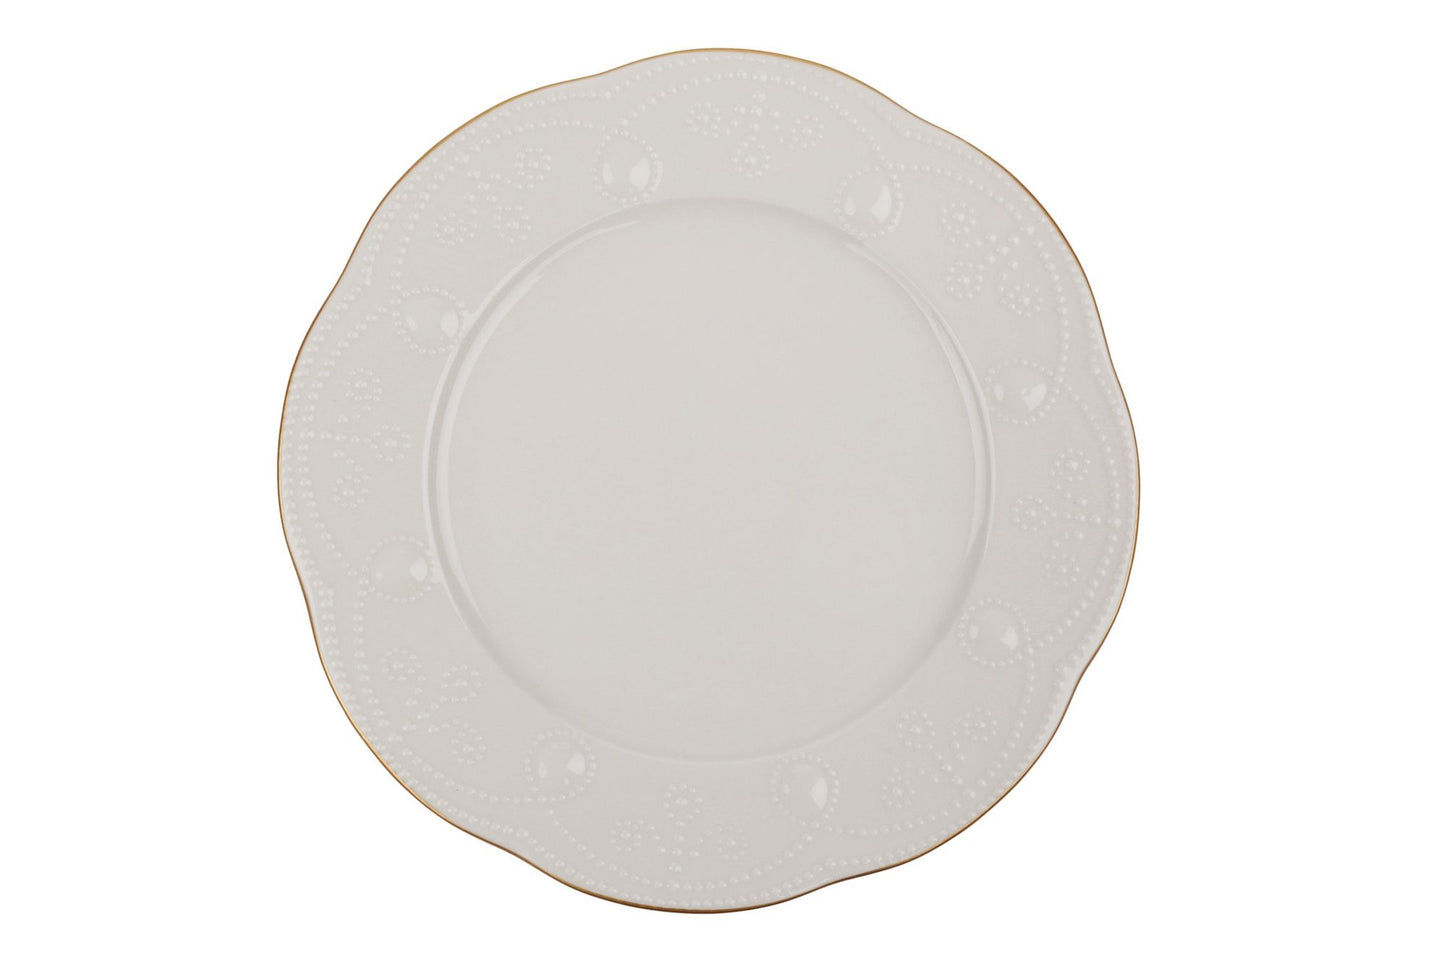 FLY83YT14R520 - Dinner Set (83 Pieces)